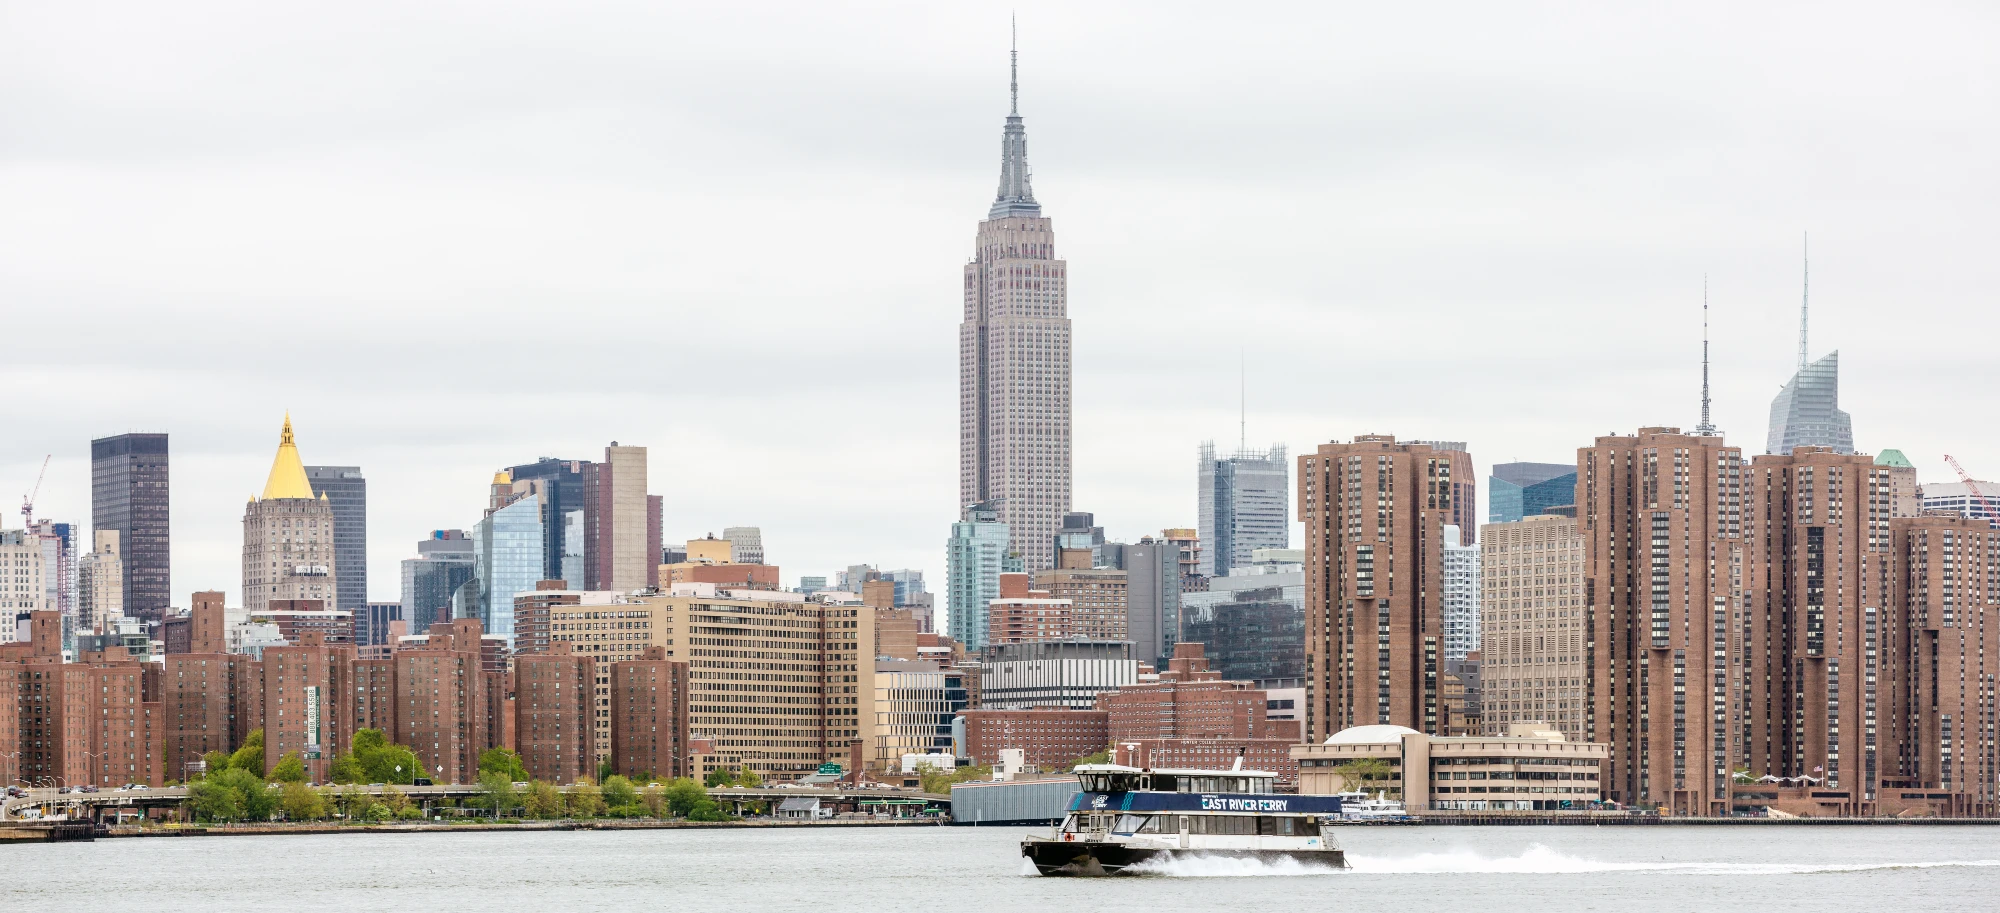 The East River Ferry sails across the East River. In the background is the Manhattan skyline with the Empire State Building in the middle. Off to the right of the skyline is One World Trade Center. It is a gray, overcast day.